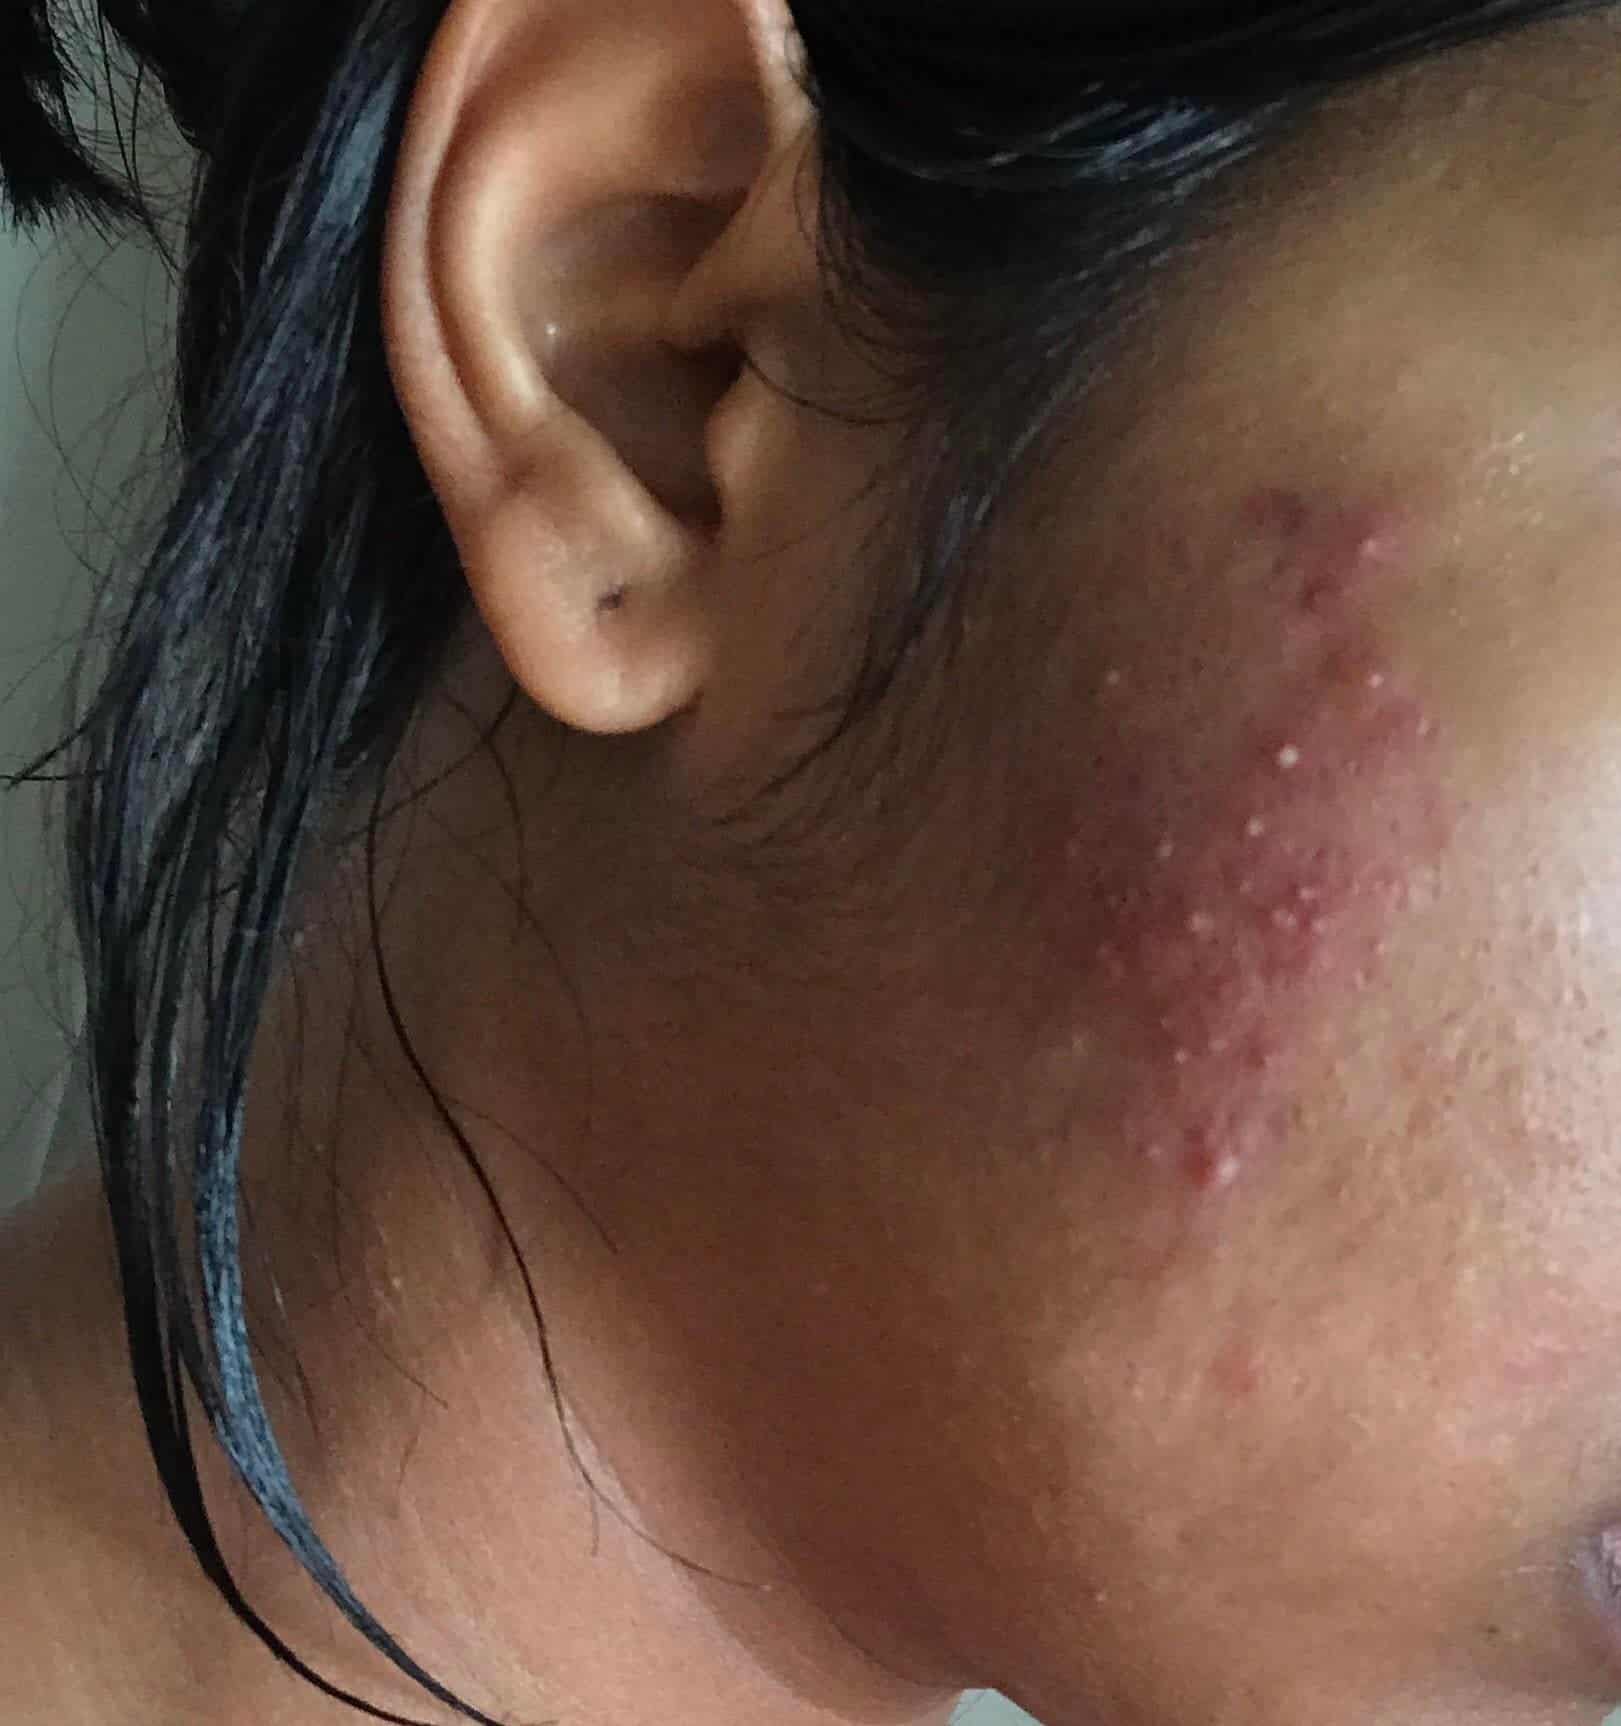 [Acne] My skin just broke out in this painful acne cluster and I have ...